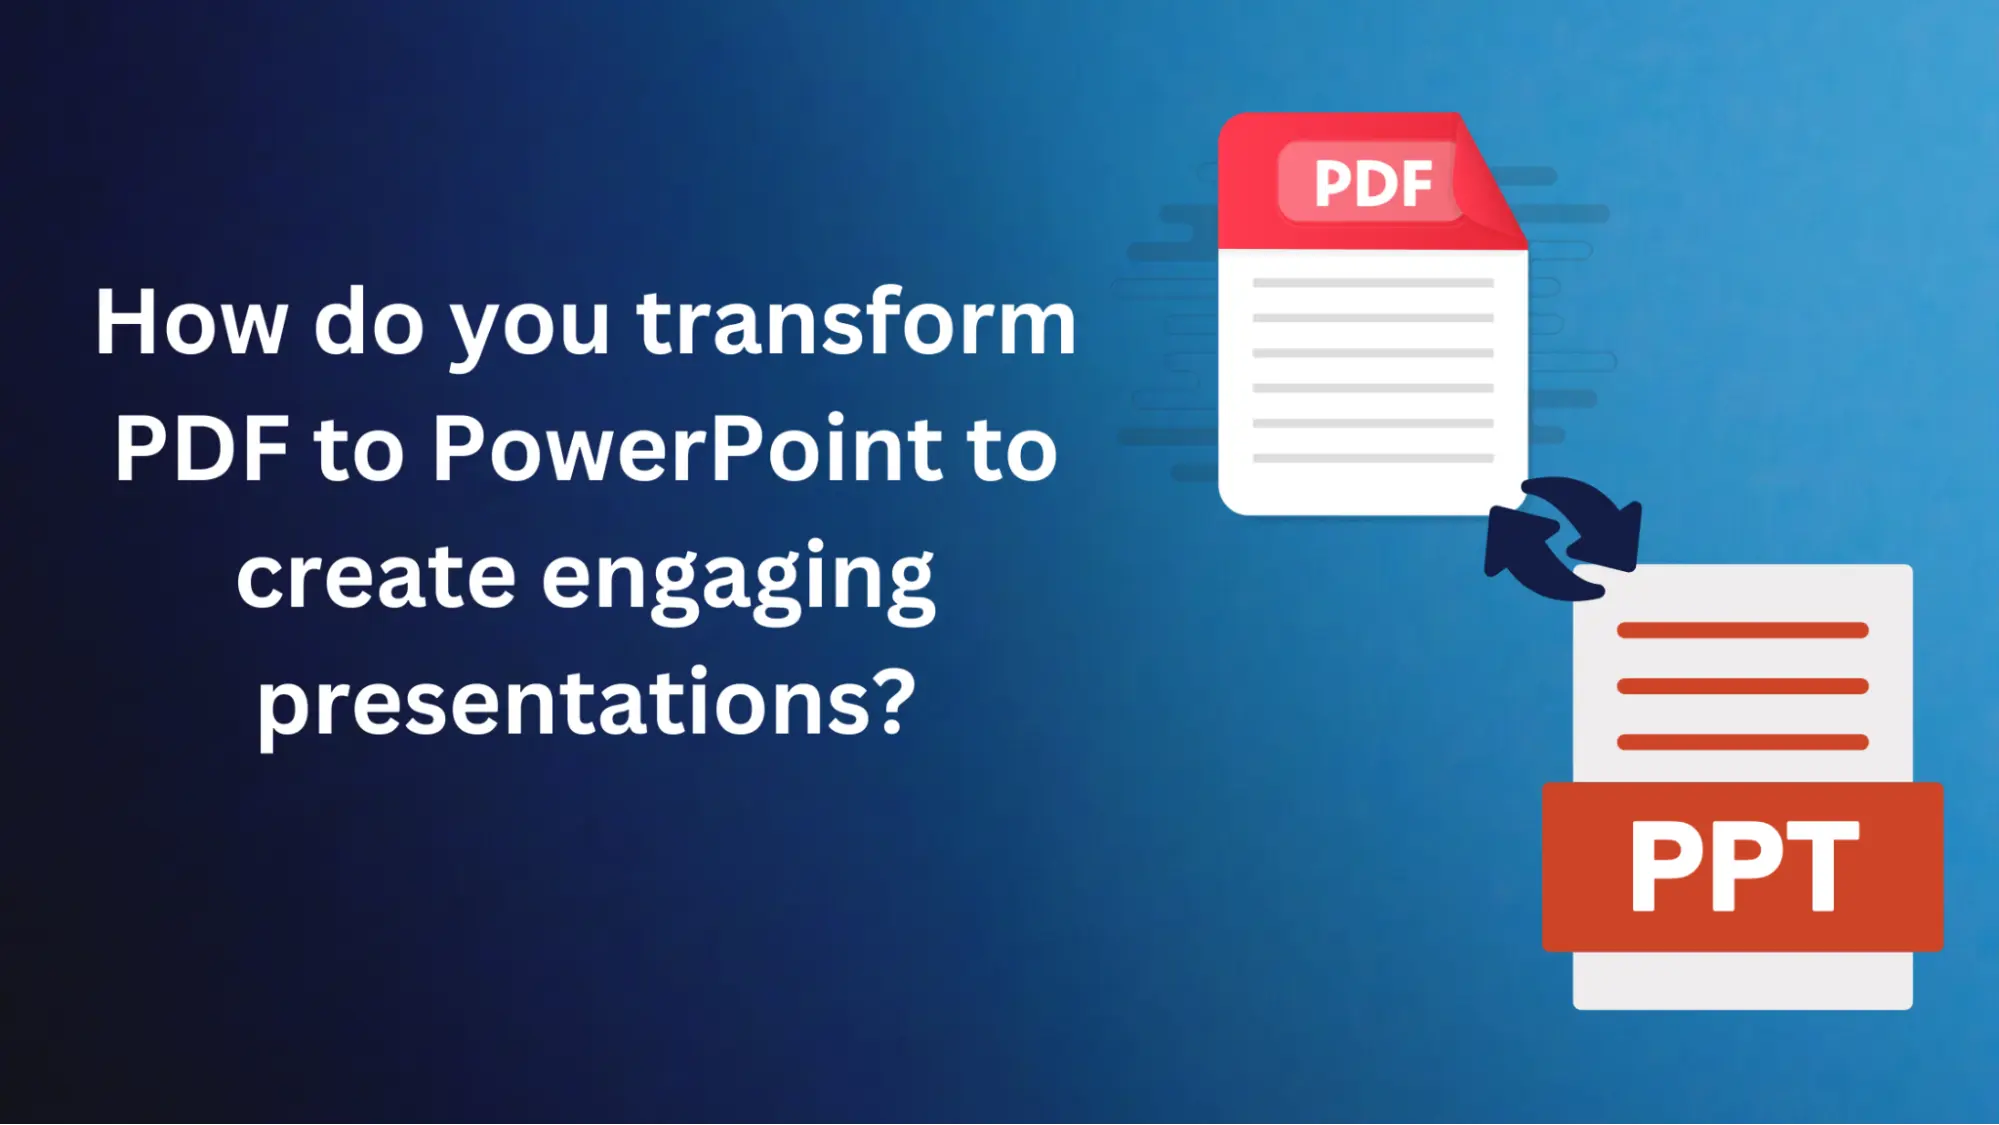 How do you transform PDF to PowerPoint to create engaging presentations?